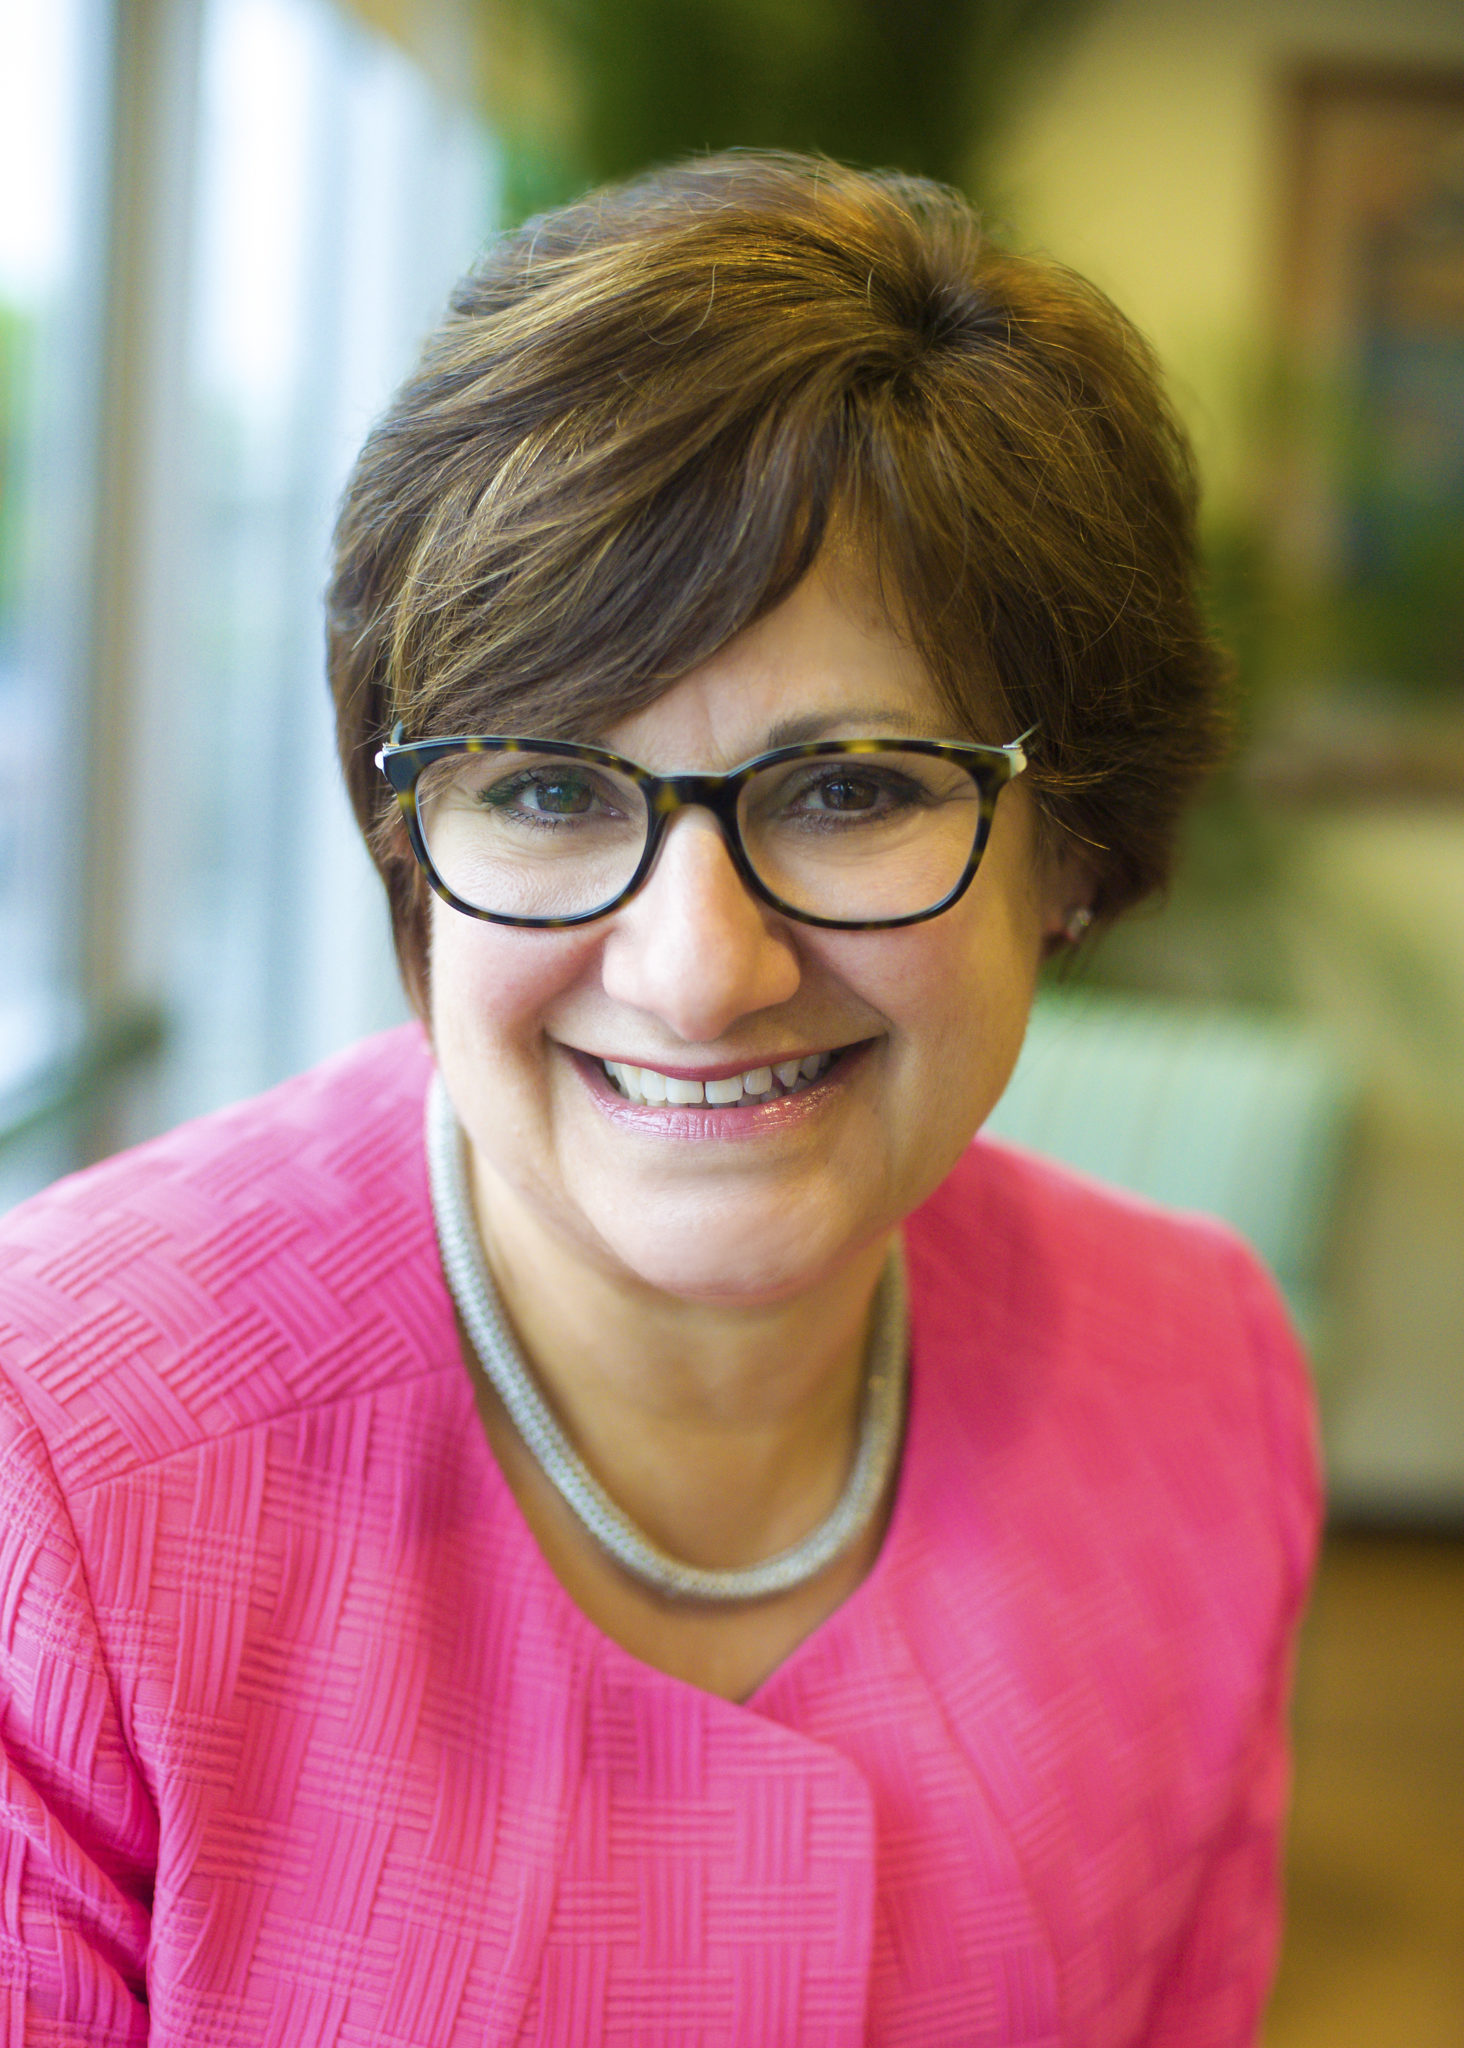 Woman in pink blazer and glasses smiling in a well-lit room